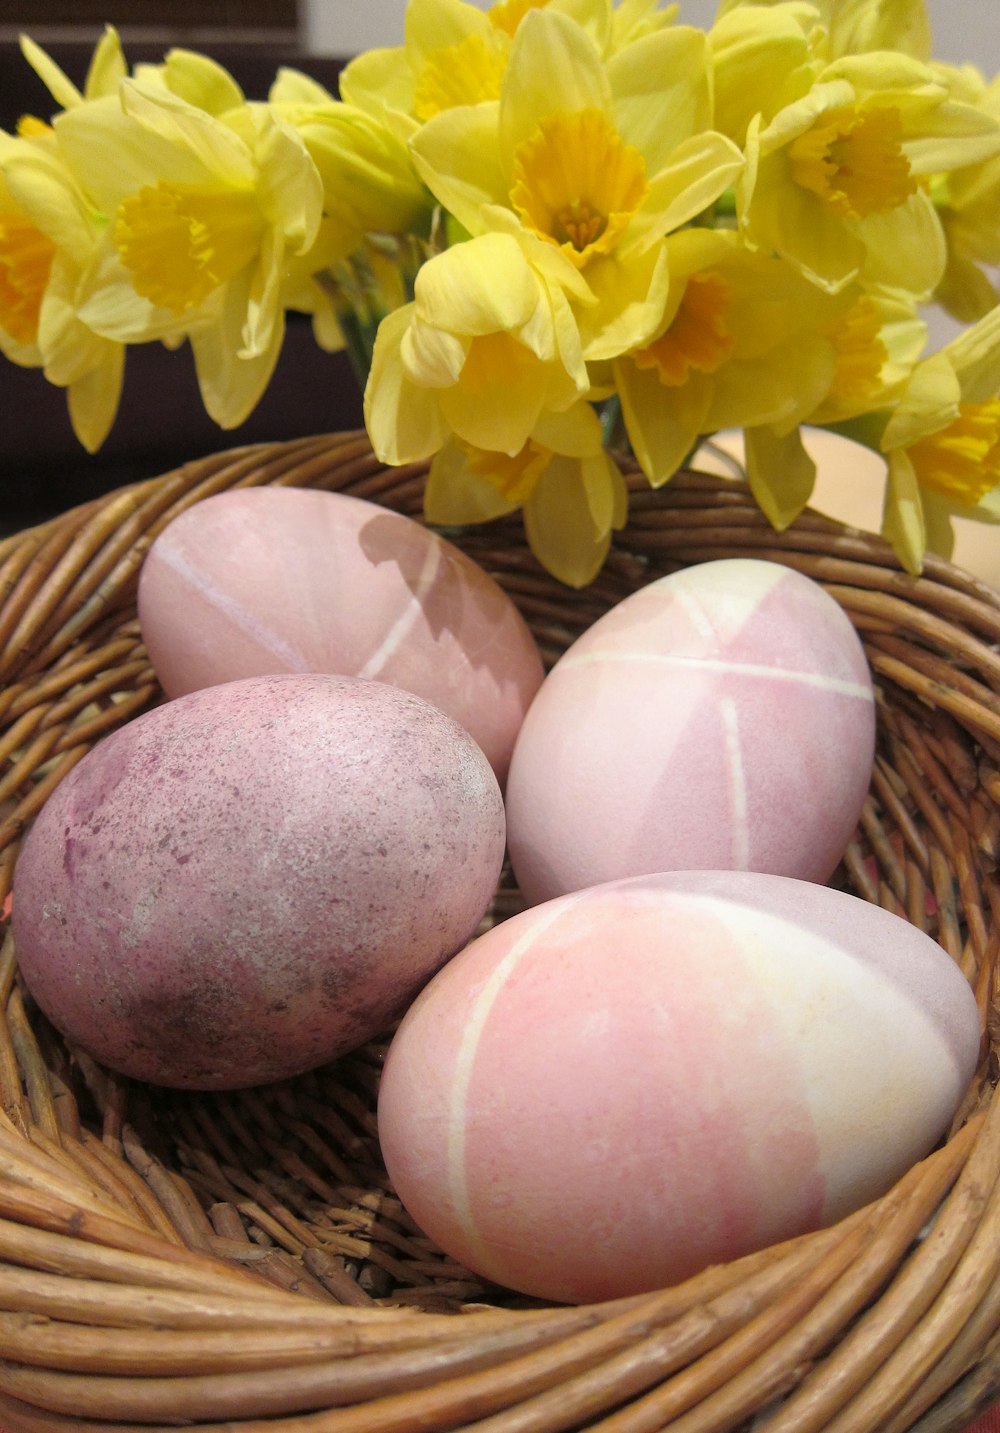 a wicker basket filled with eggs and yellow flowers